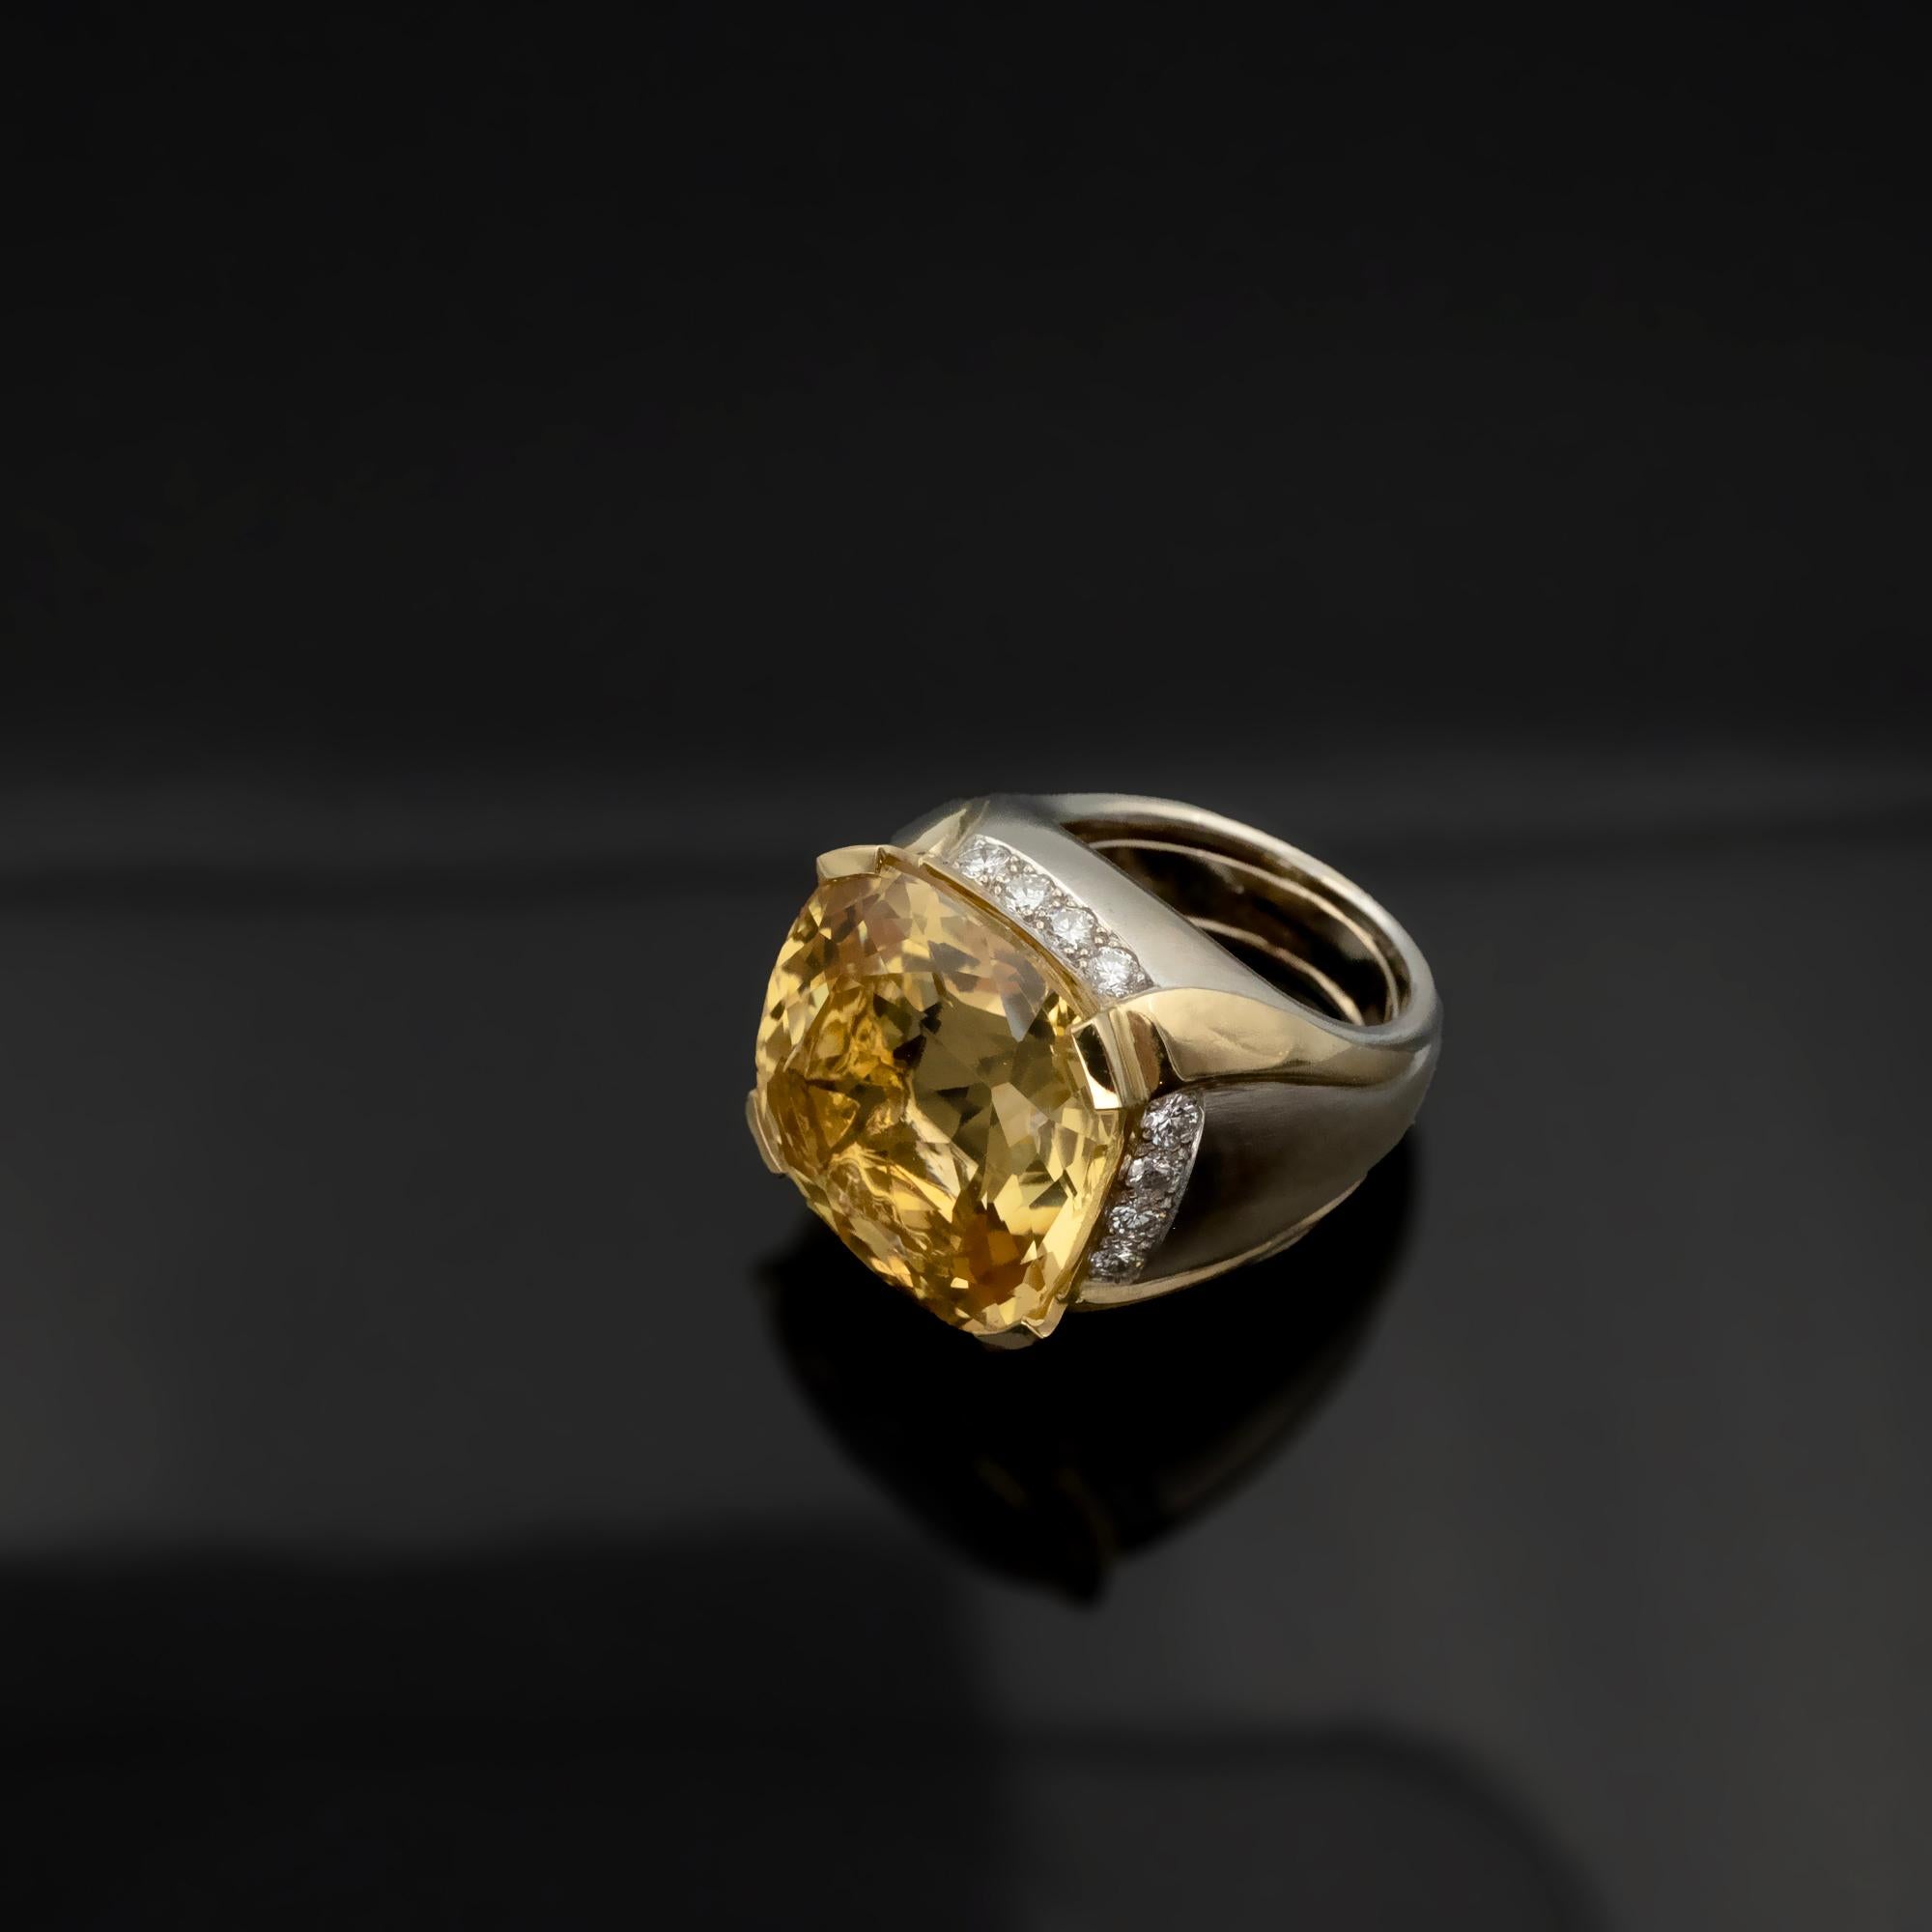 Claris-A 18kt Dual-Tone Gold Cushion-Cut Citrine Cocktail Ring with Diamonds For Sale 1